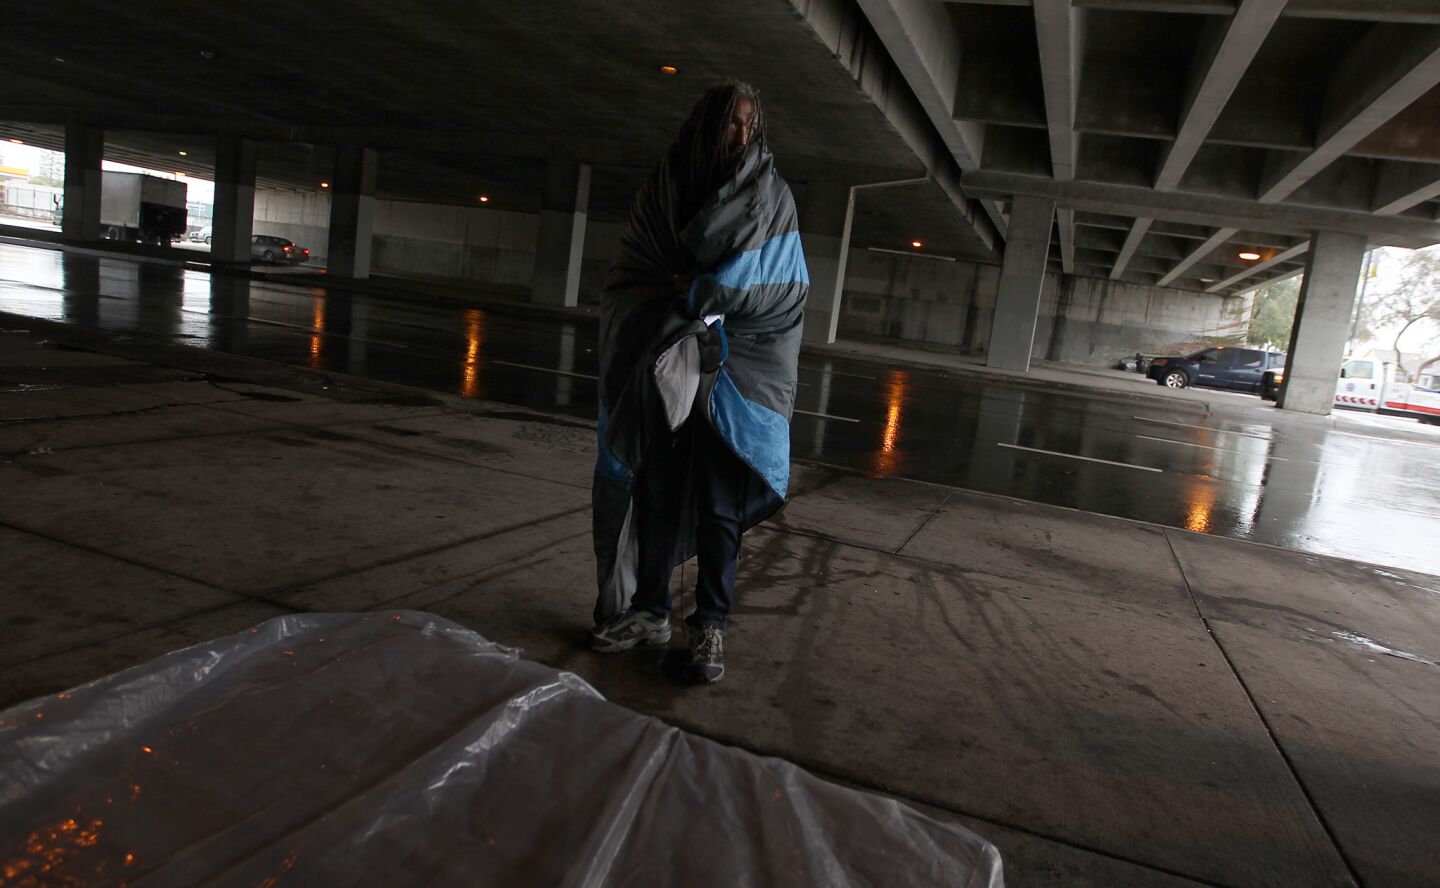 A homeless man seeks shelters beneath the 405 Freeway along Venice Boulevard as the first of several El Niño storms hit Southern California.